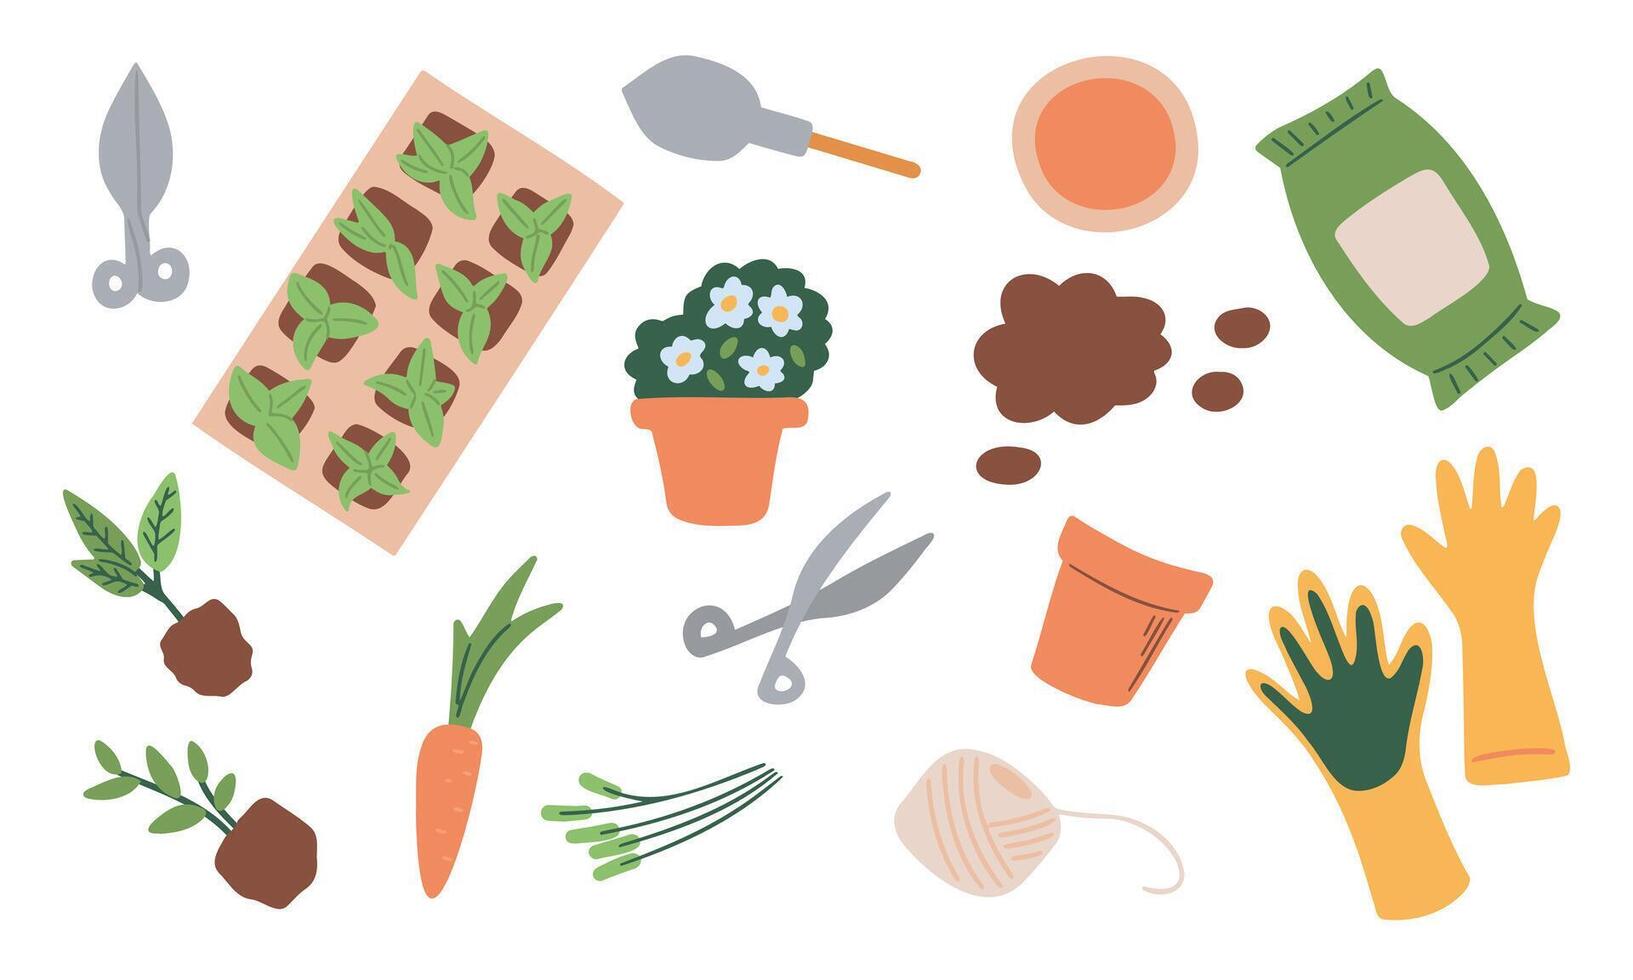 Gardeners Equipment Set Of Objects Needed For Gardening And Farming Isolated Vector Illustrations